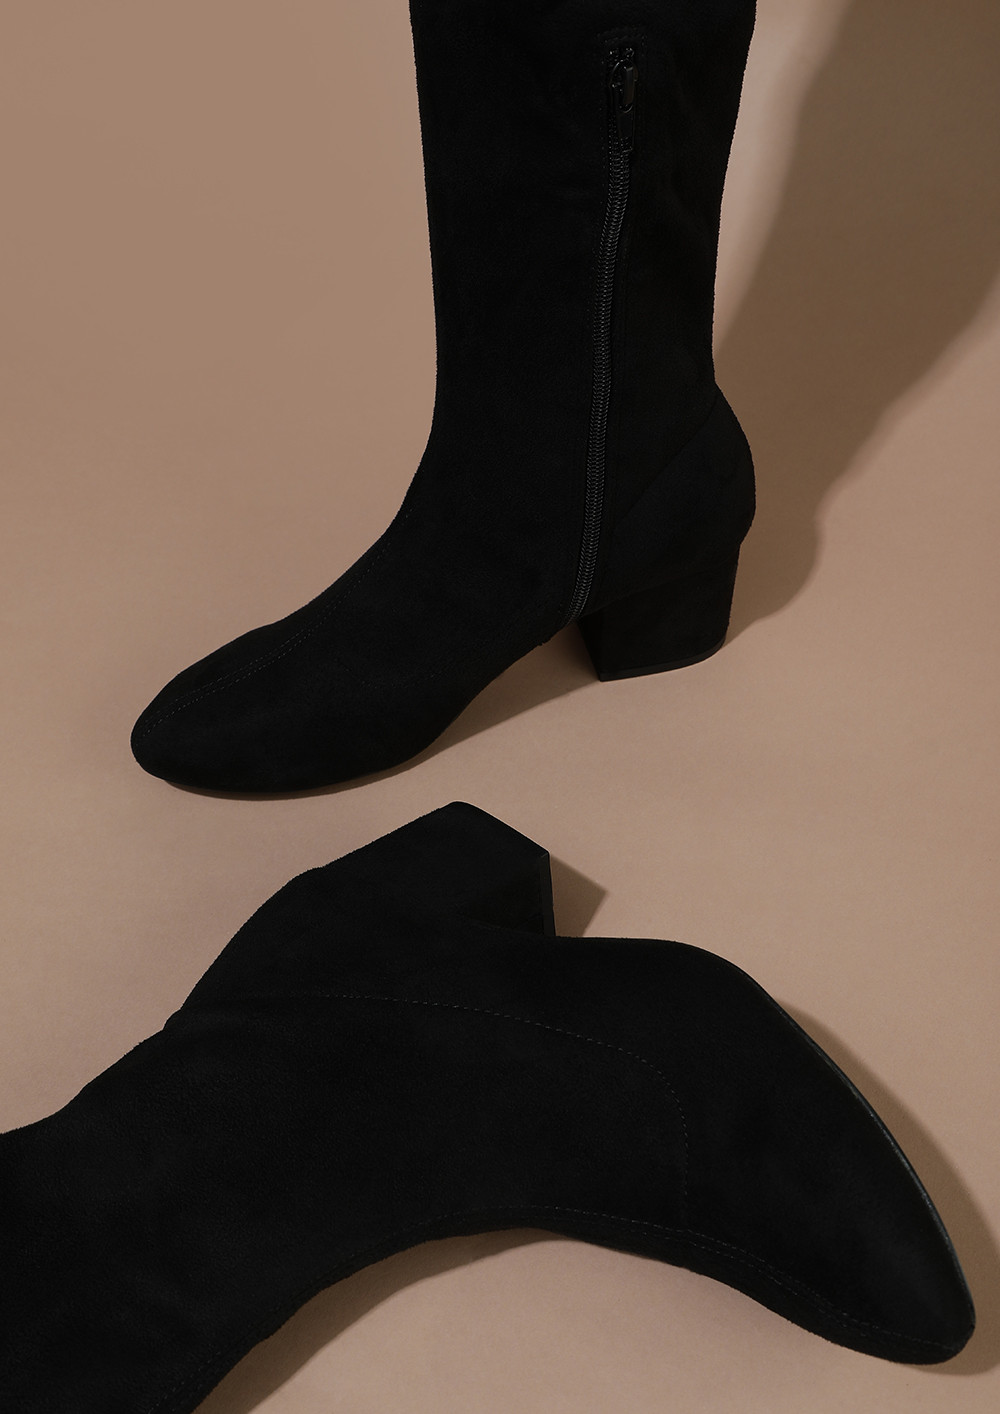 STOMPING AROUND THE TOWN BLACK CALF-LENGTH BOOTS